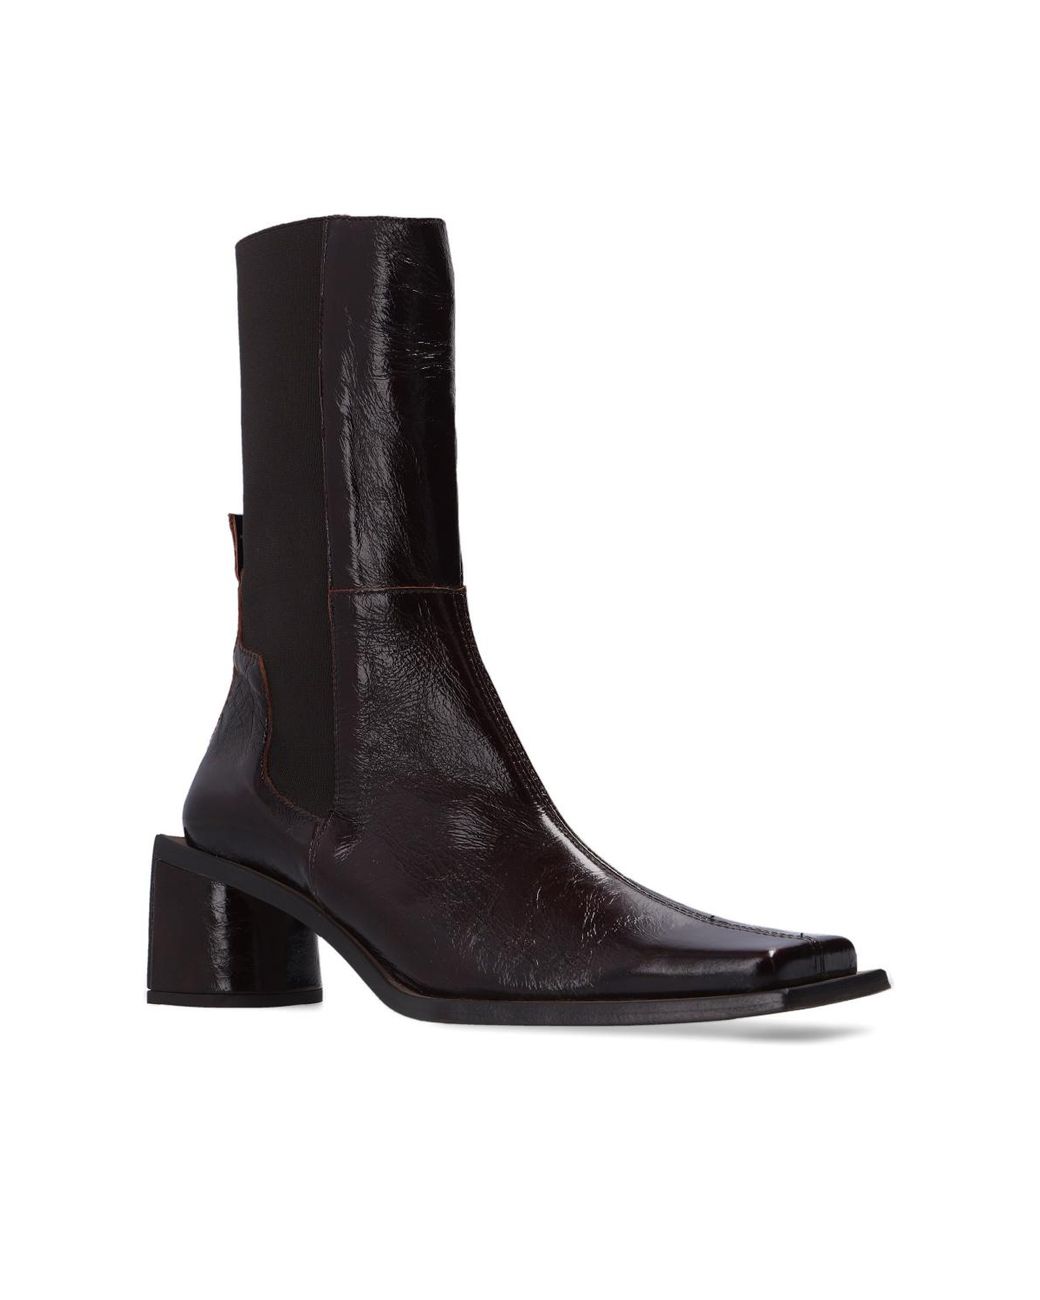 Miista Leather 'minnie' Heeled Ankle Boots in Brown | Lyst